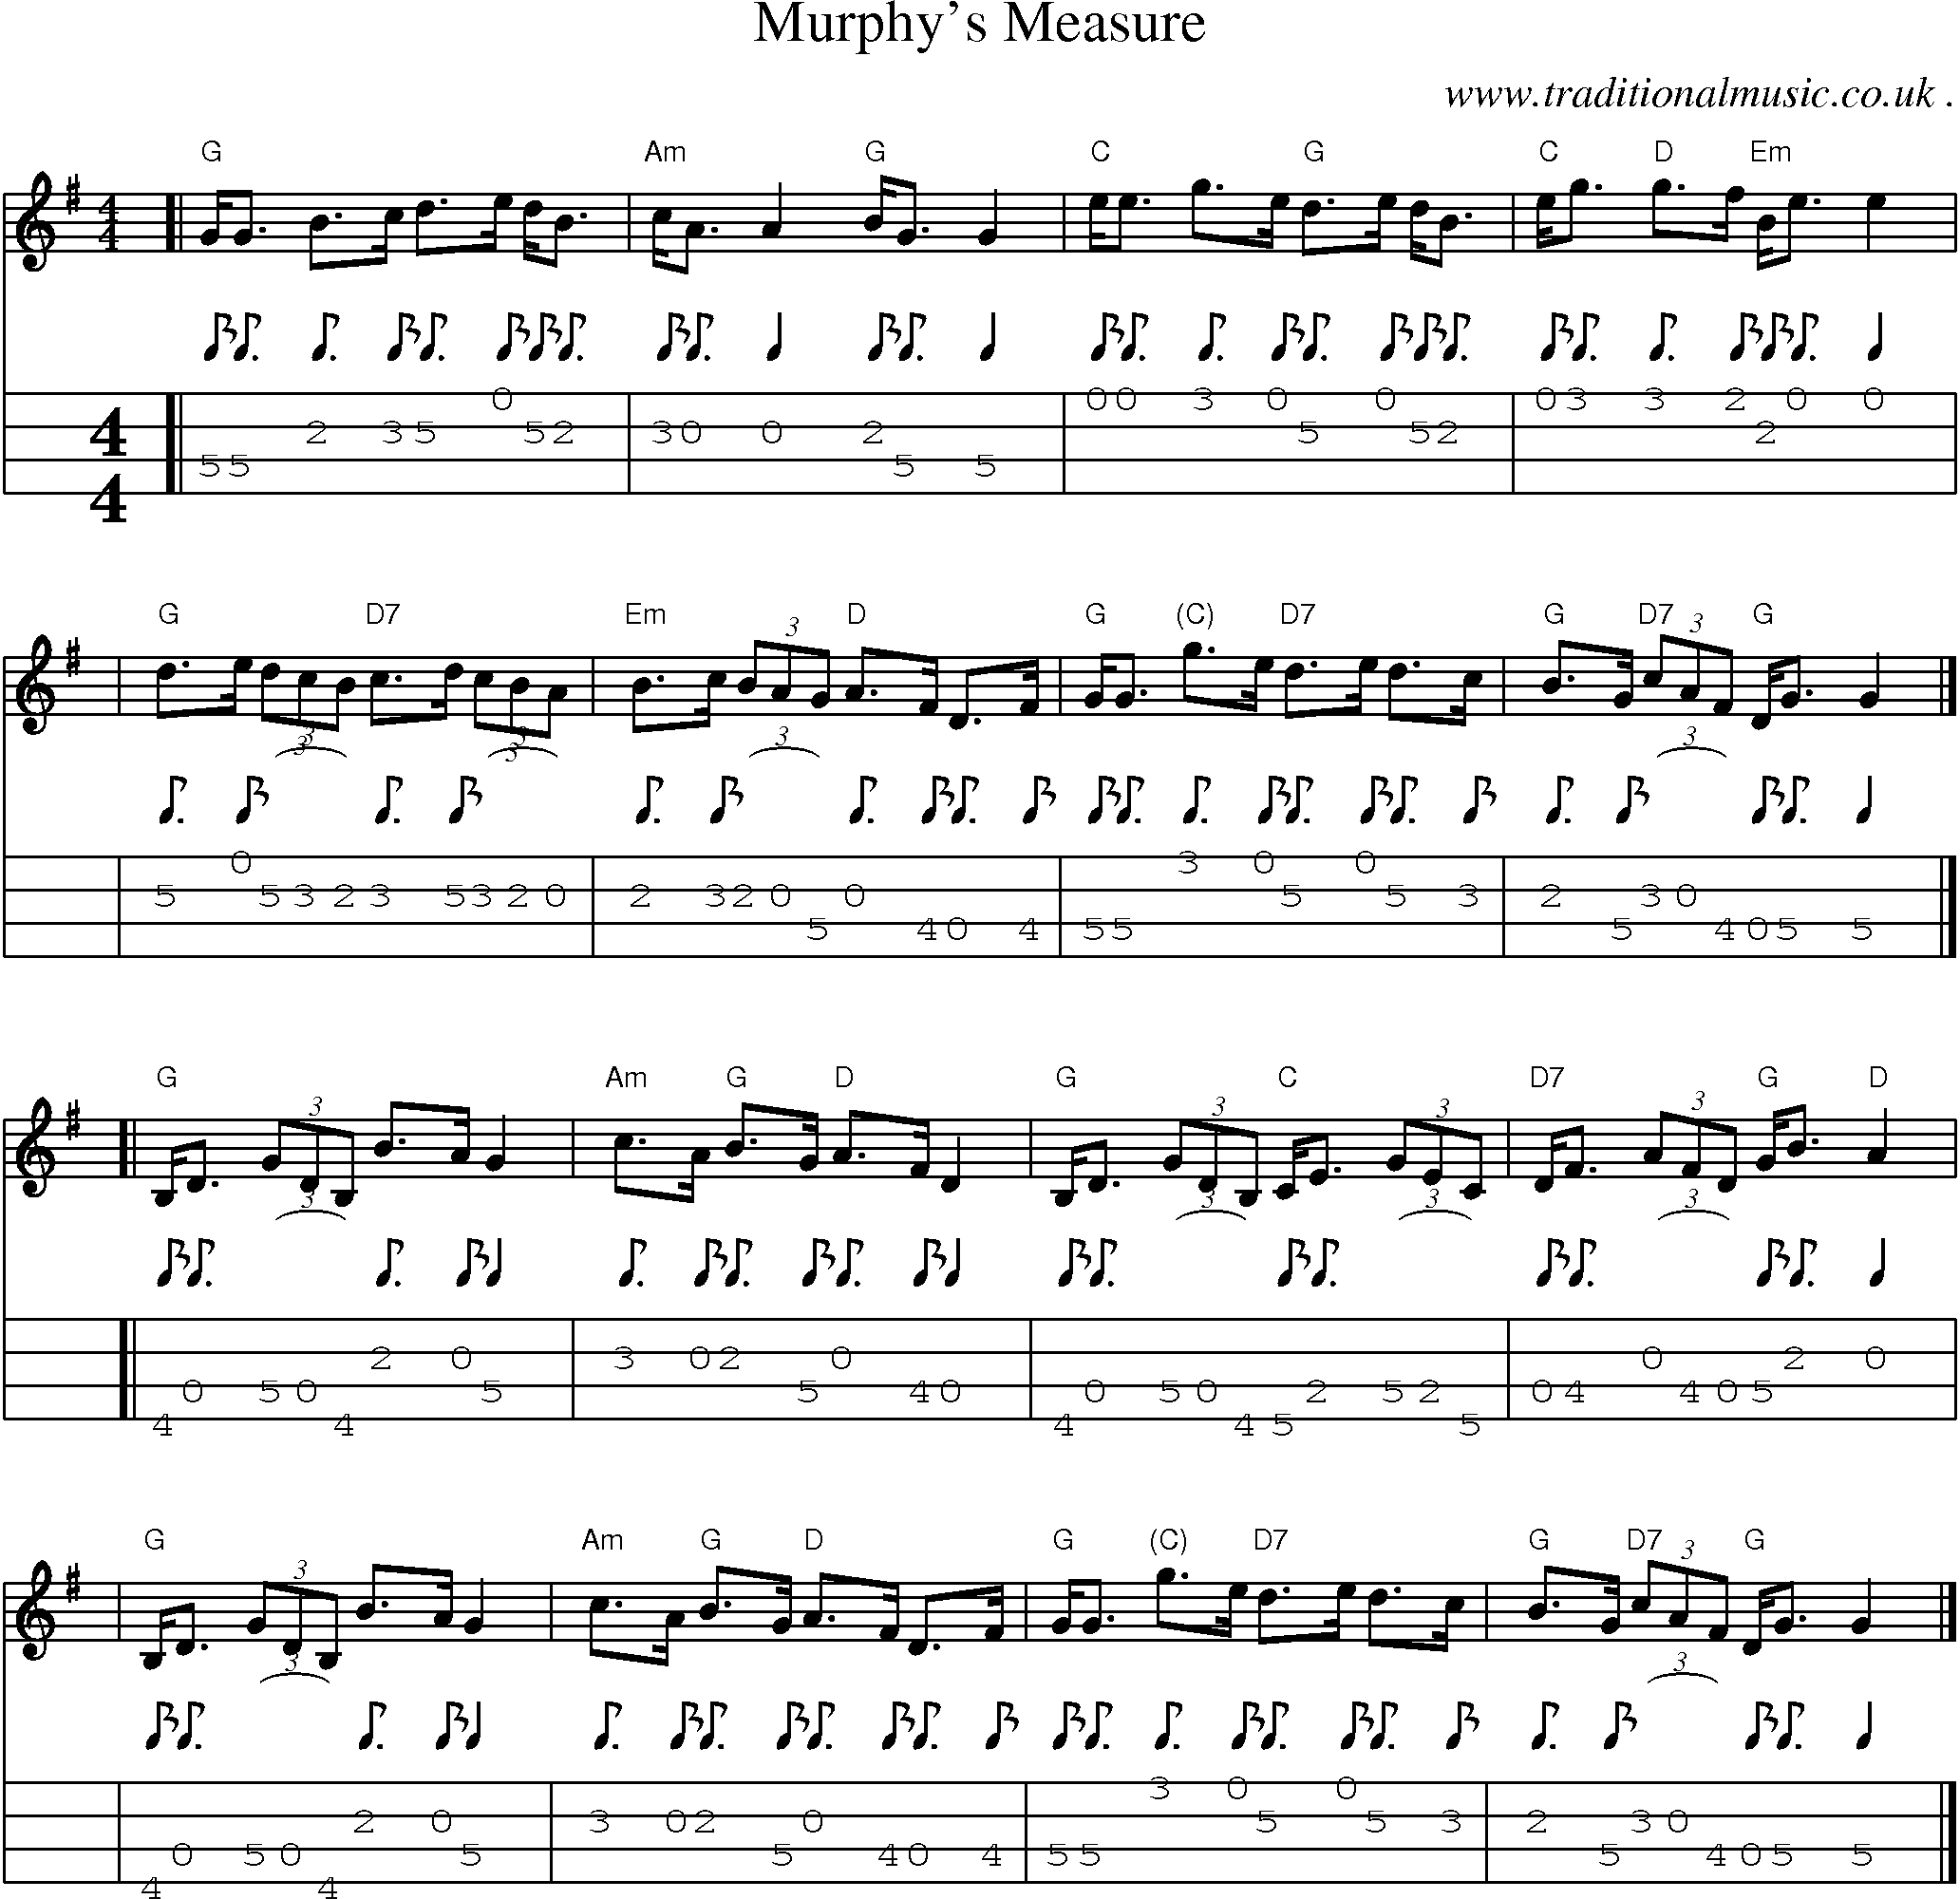 Sheet-music  score, Chords and Mandolin Tabs for Murphys Measure